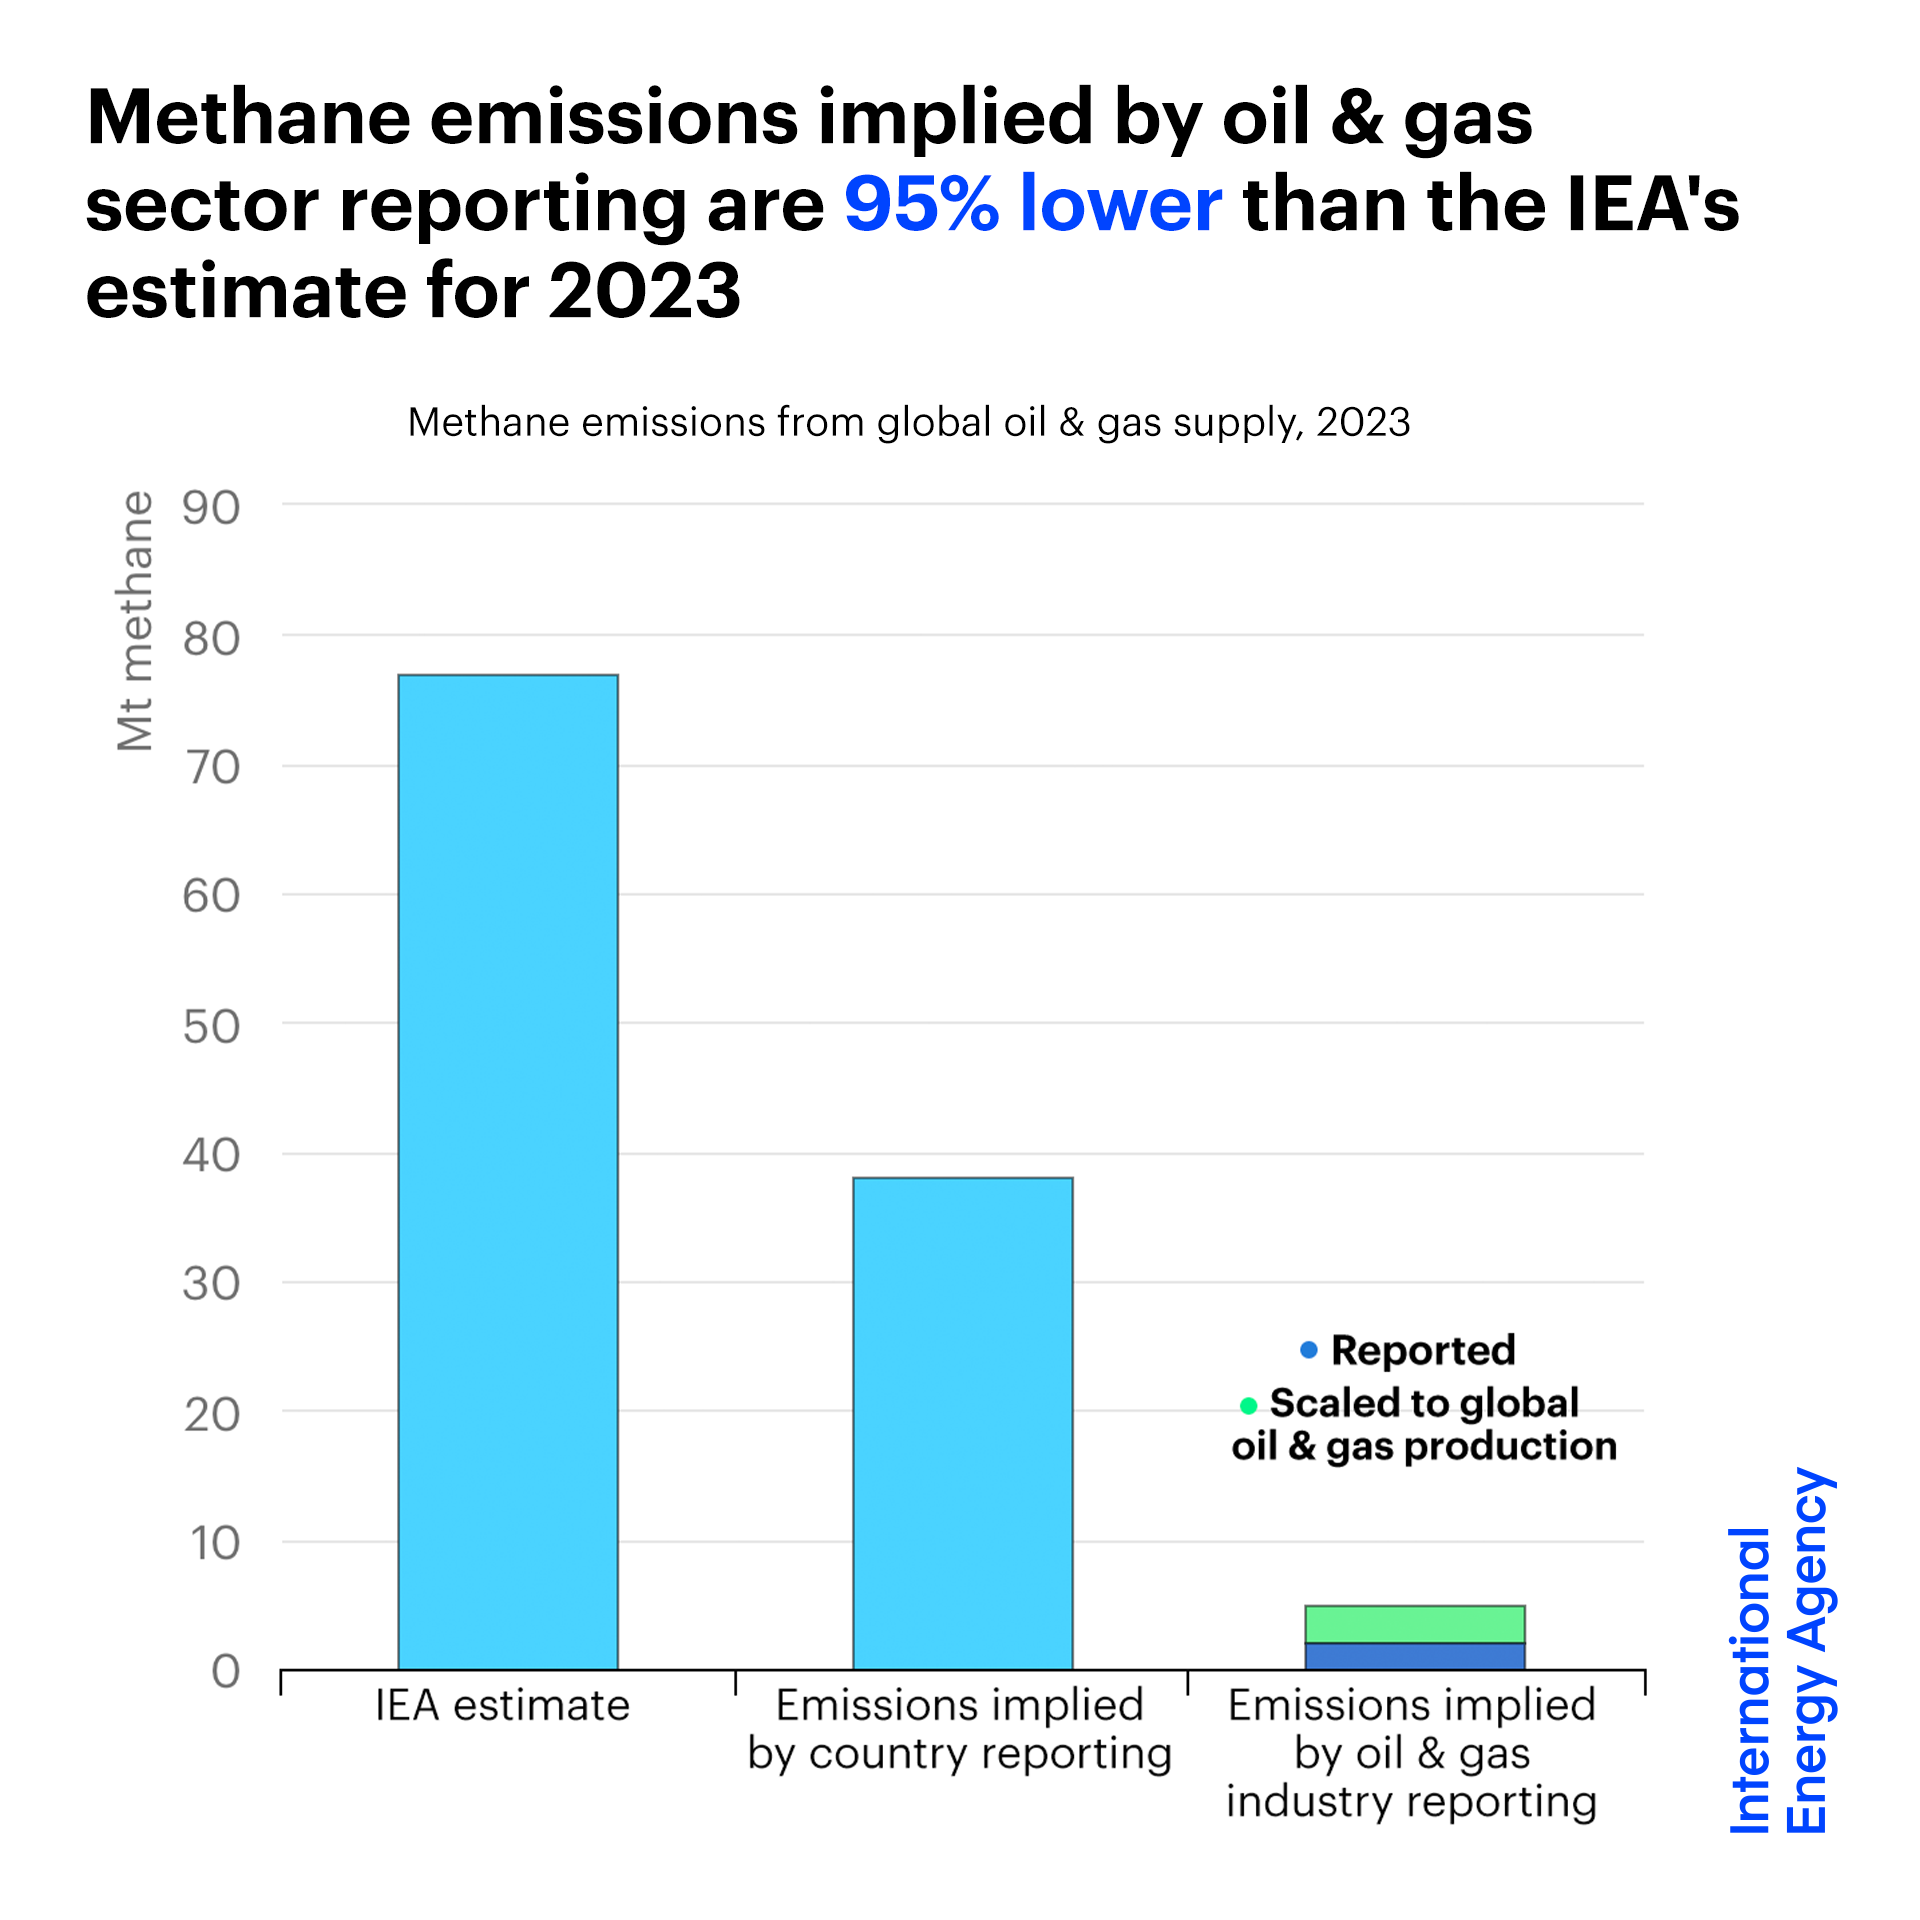 Methane emissions implied by oil and gas sector reporting are 95% lower than the IEA's estimate for 2023